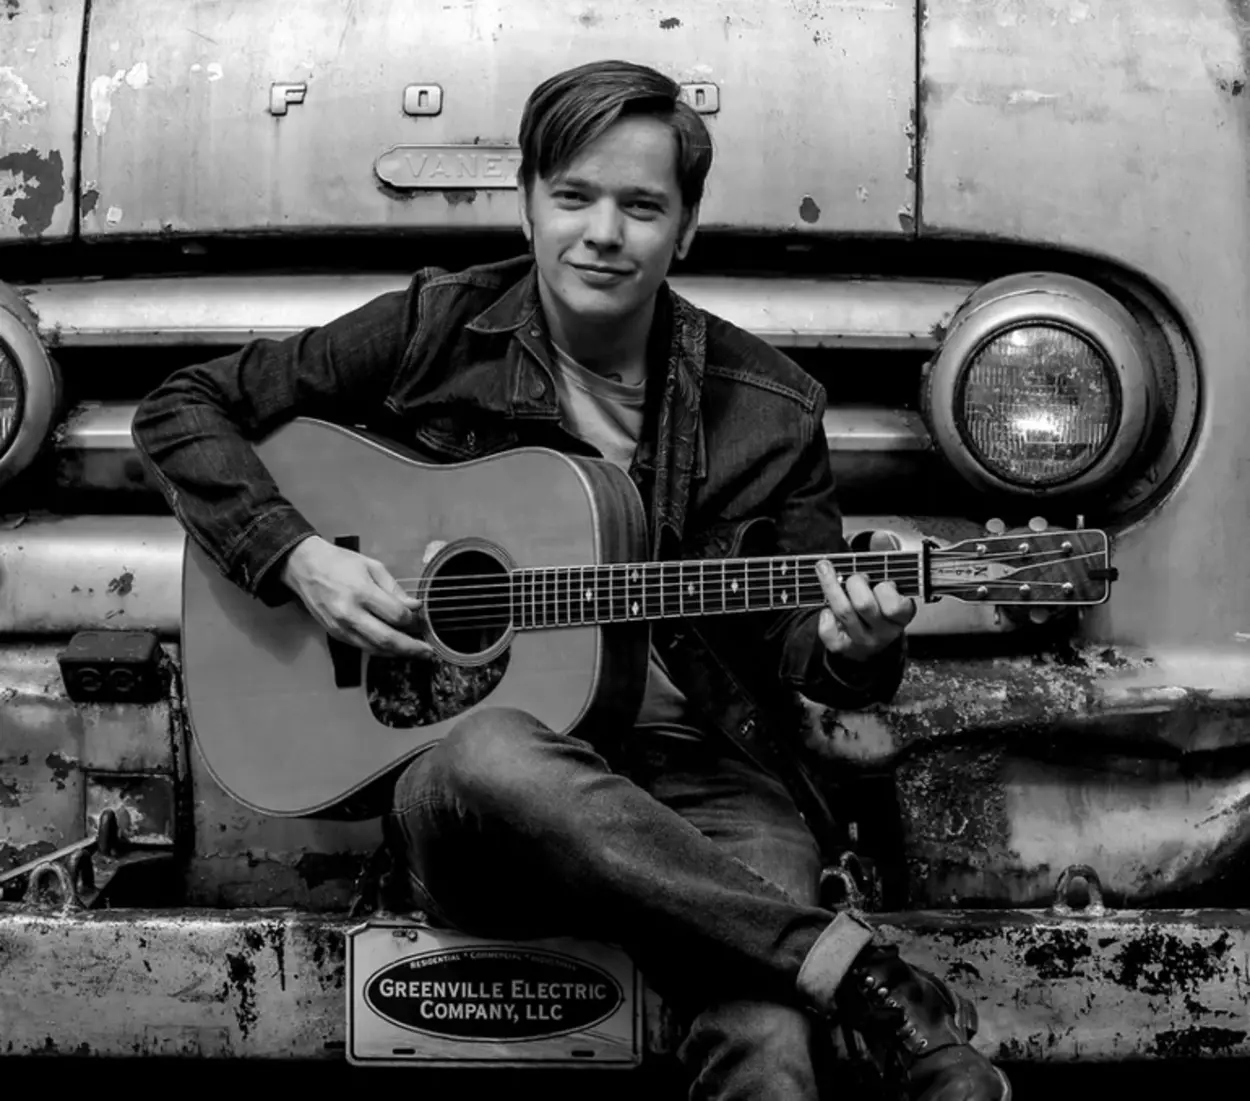 Billy Strings, playing guitar in front of a truck